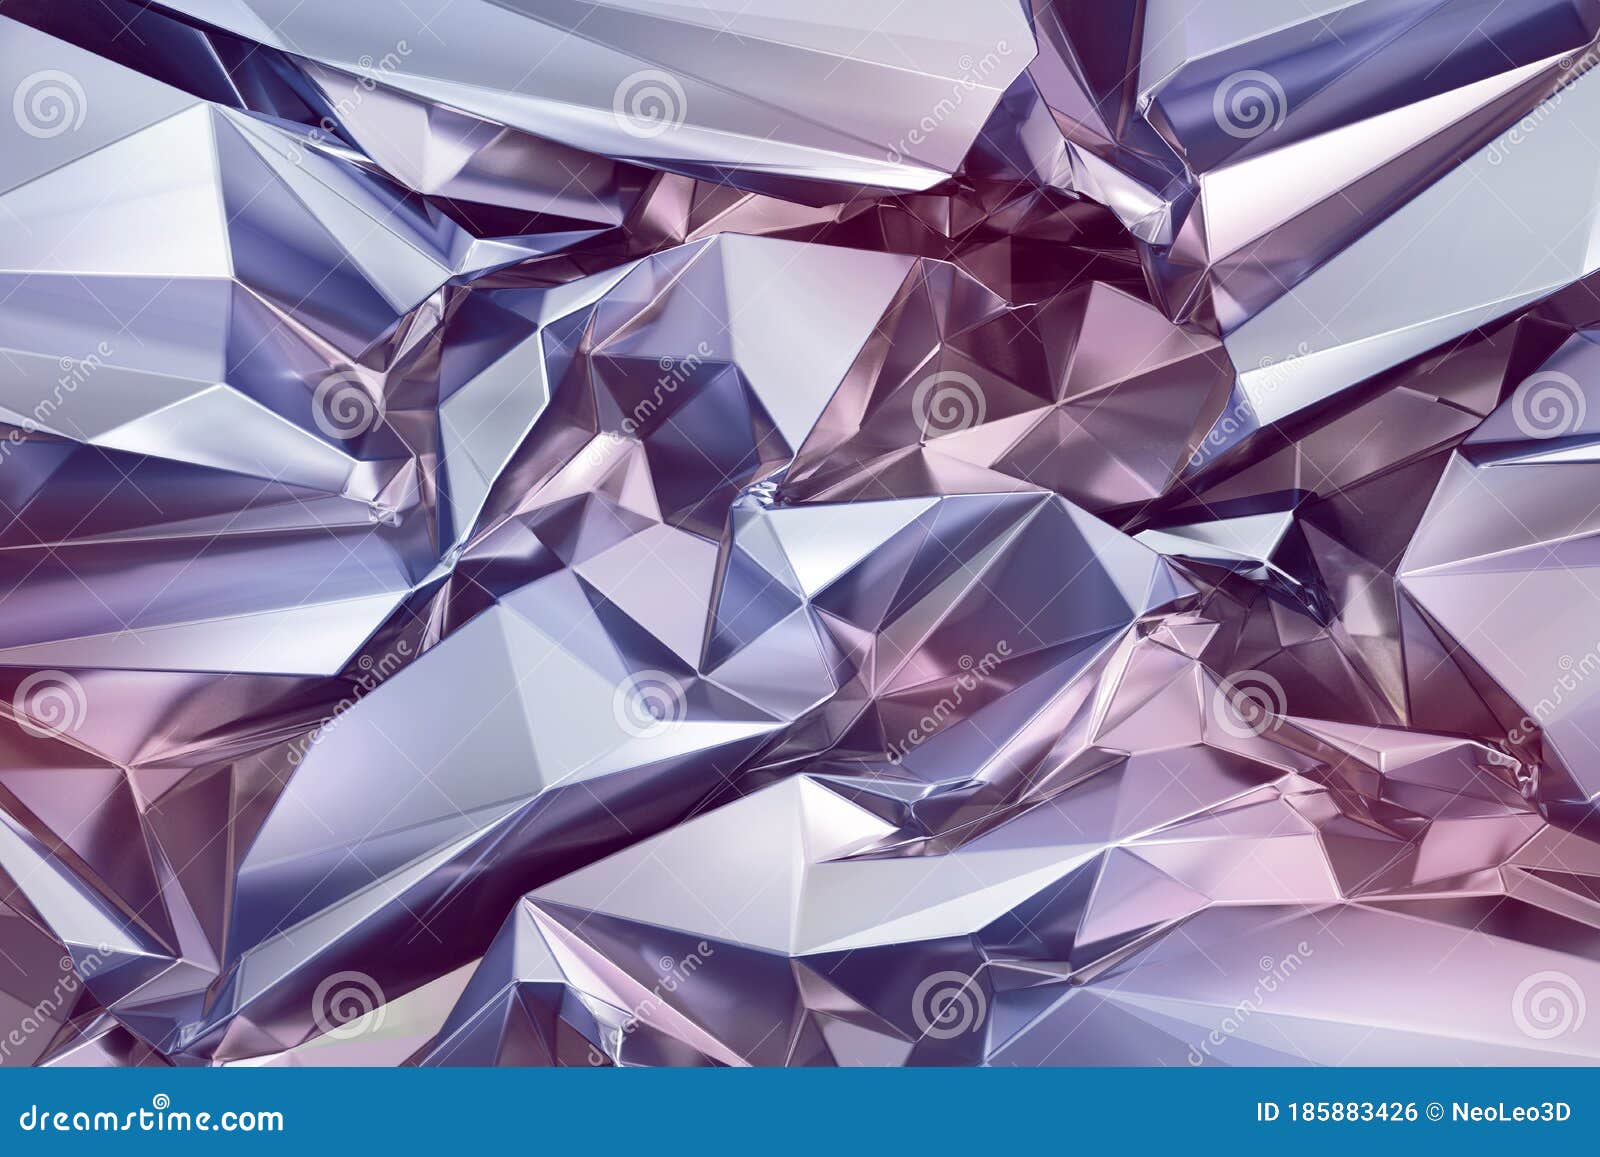 3d Render, Abstract Shiny Silver Polygonal Faceted Background, Crystal  Structure, Crumpled Holographic Metallic Foil Texture, Stock Illustration -  Illustration of foil, pastel: 185883426